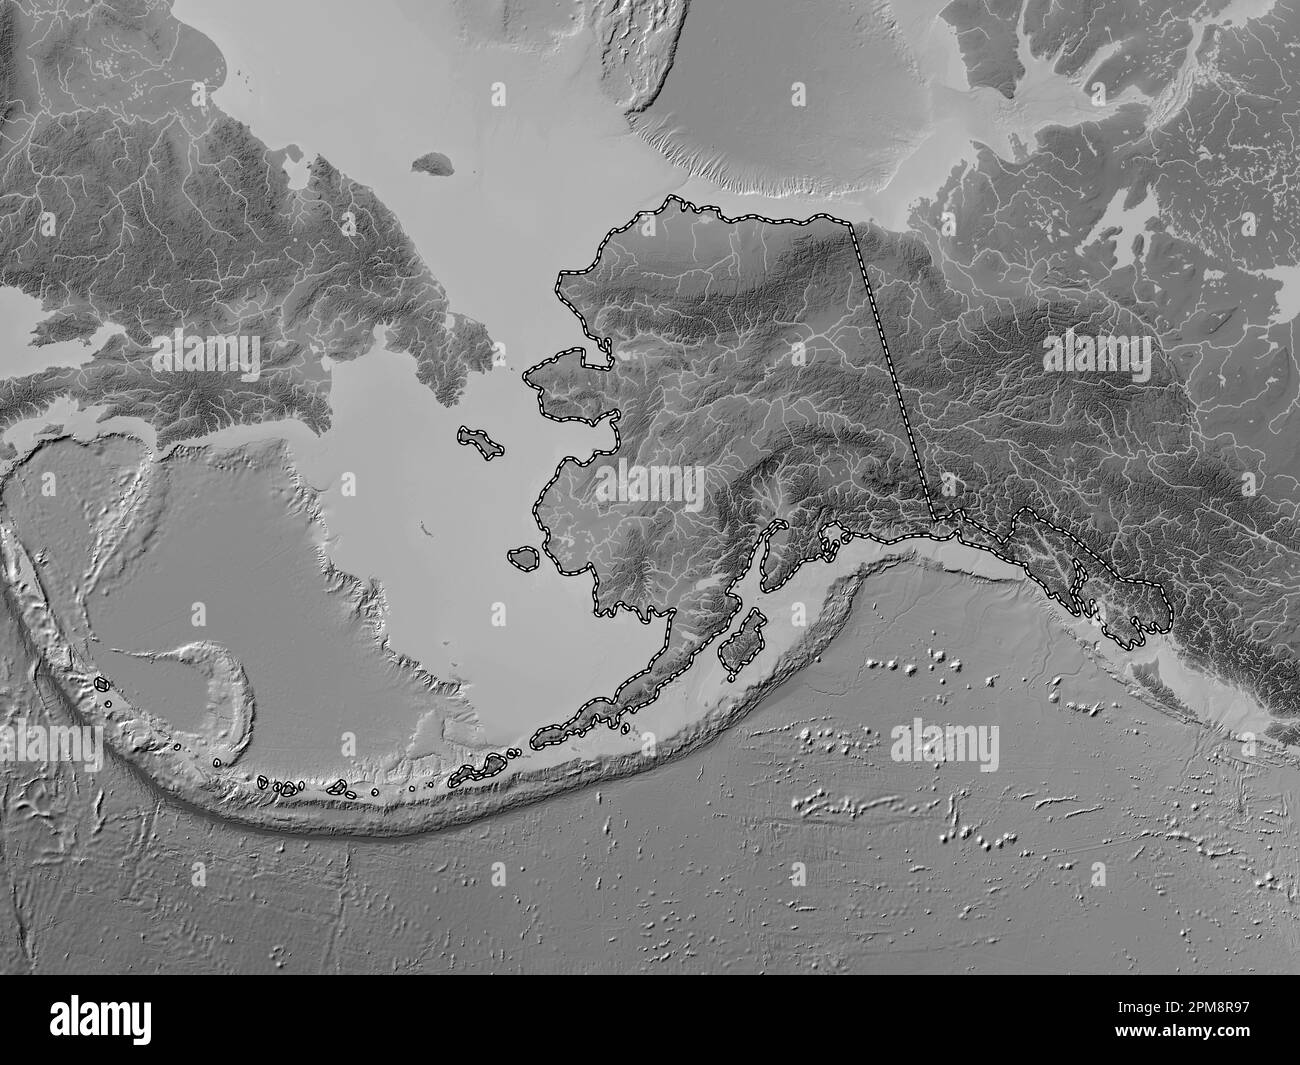 Alaska, state of United States of America. Grayscale elevation map with lakes and rivers Stock Photo